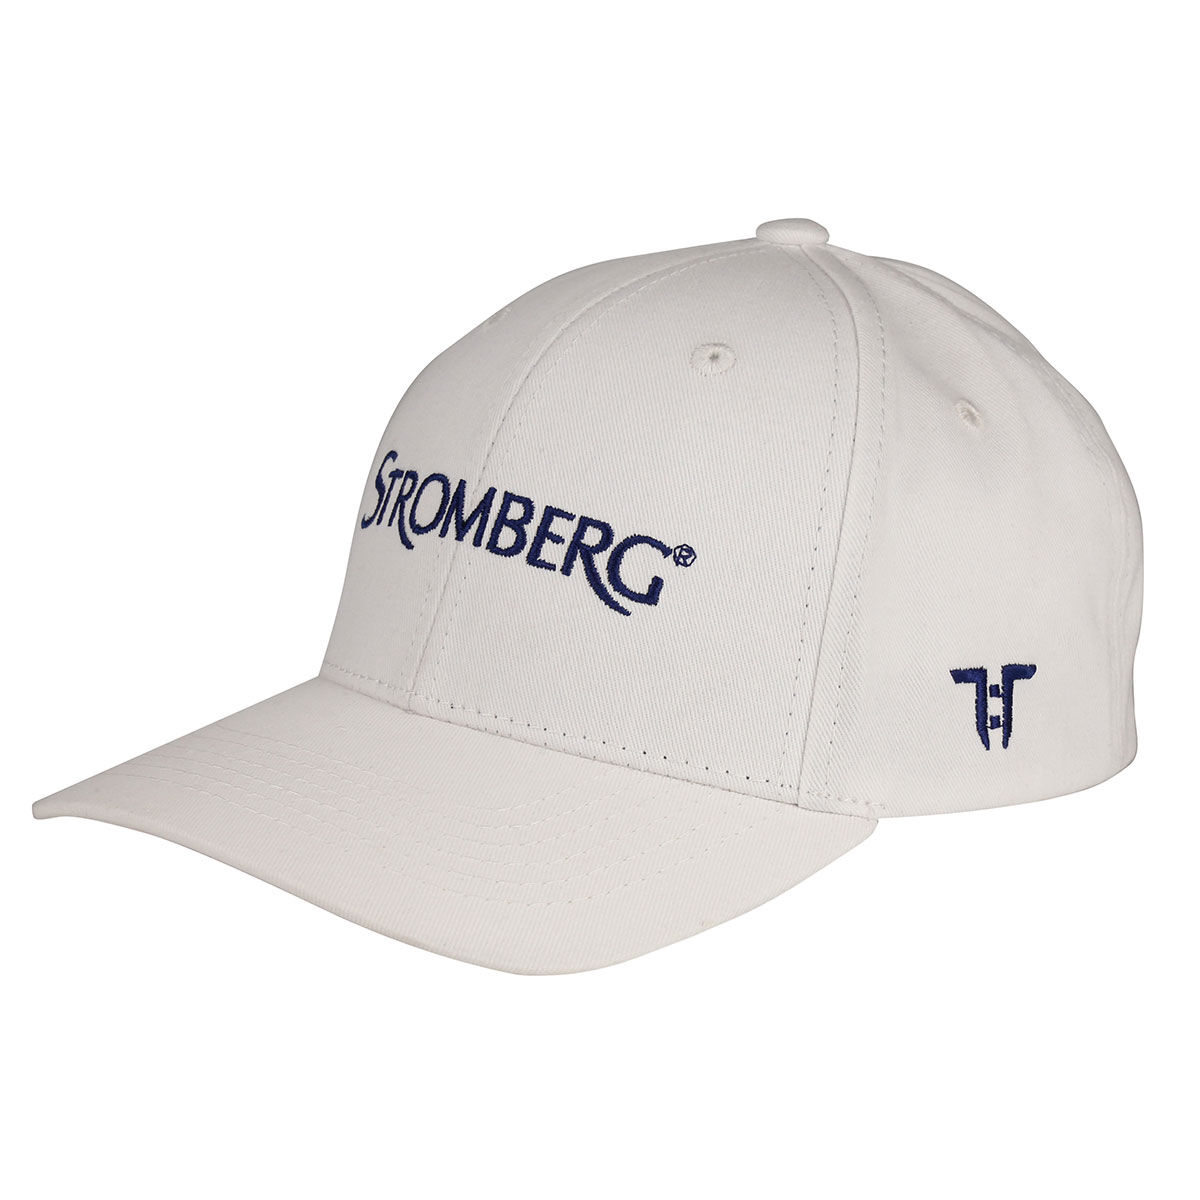 Stromberg Women's White and Navy Blue Embroidered Core Logo Golf Cap | American Golf, One Size von Stromberg